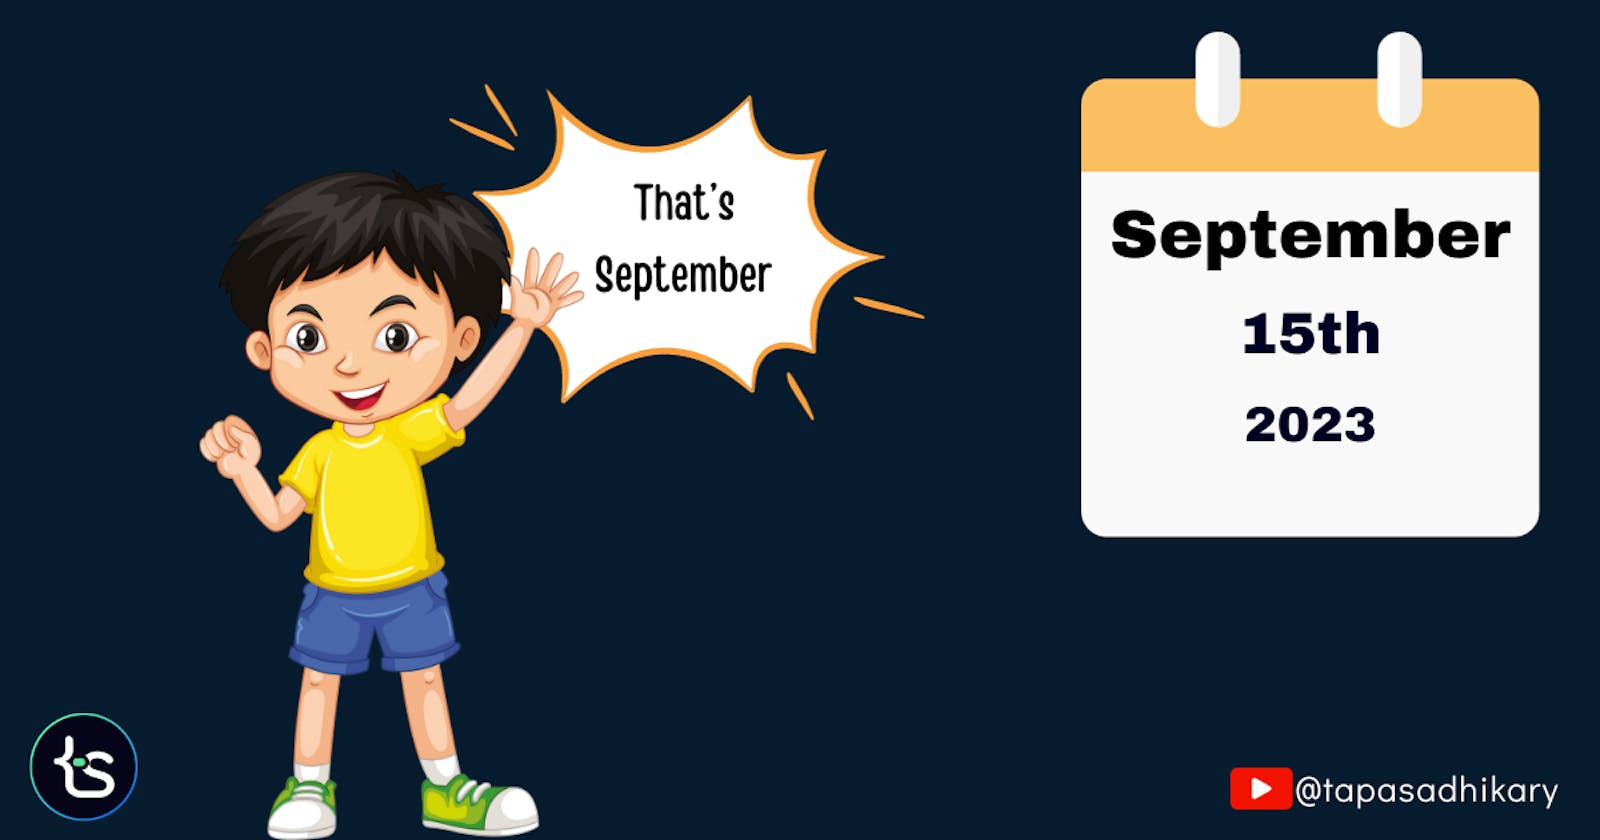 The best way to get the month name from a date in JavaScript